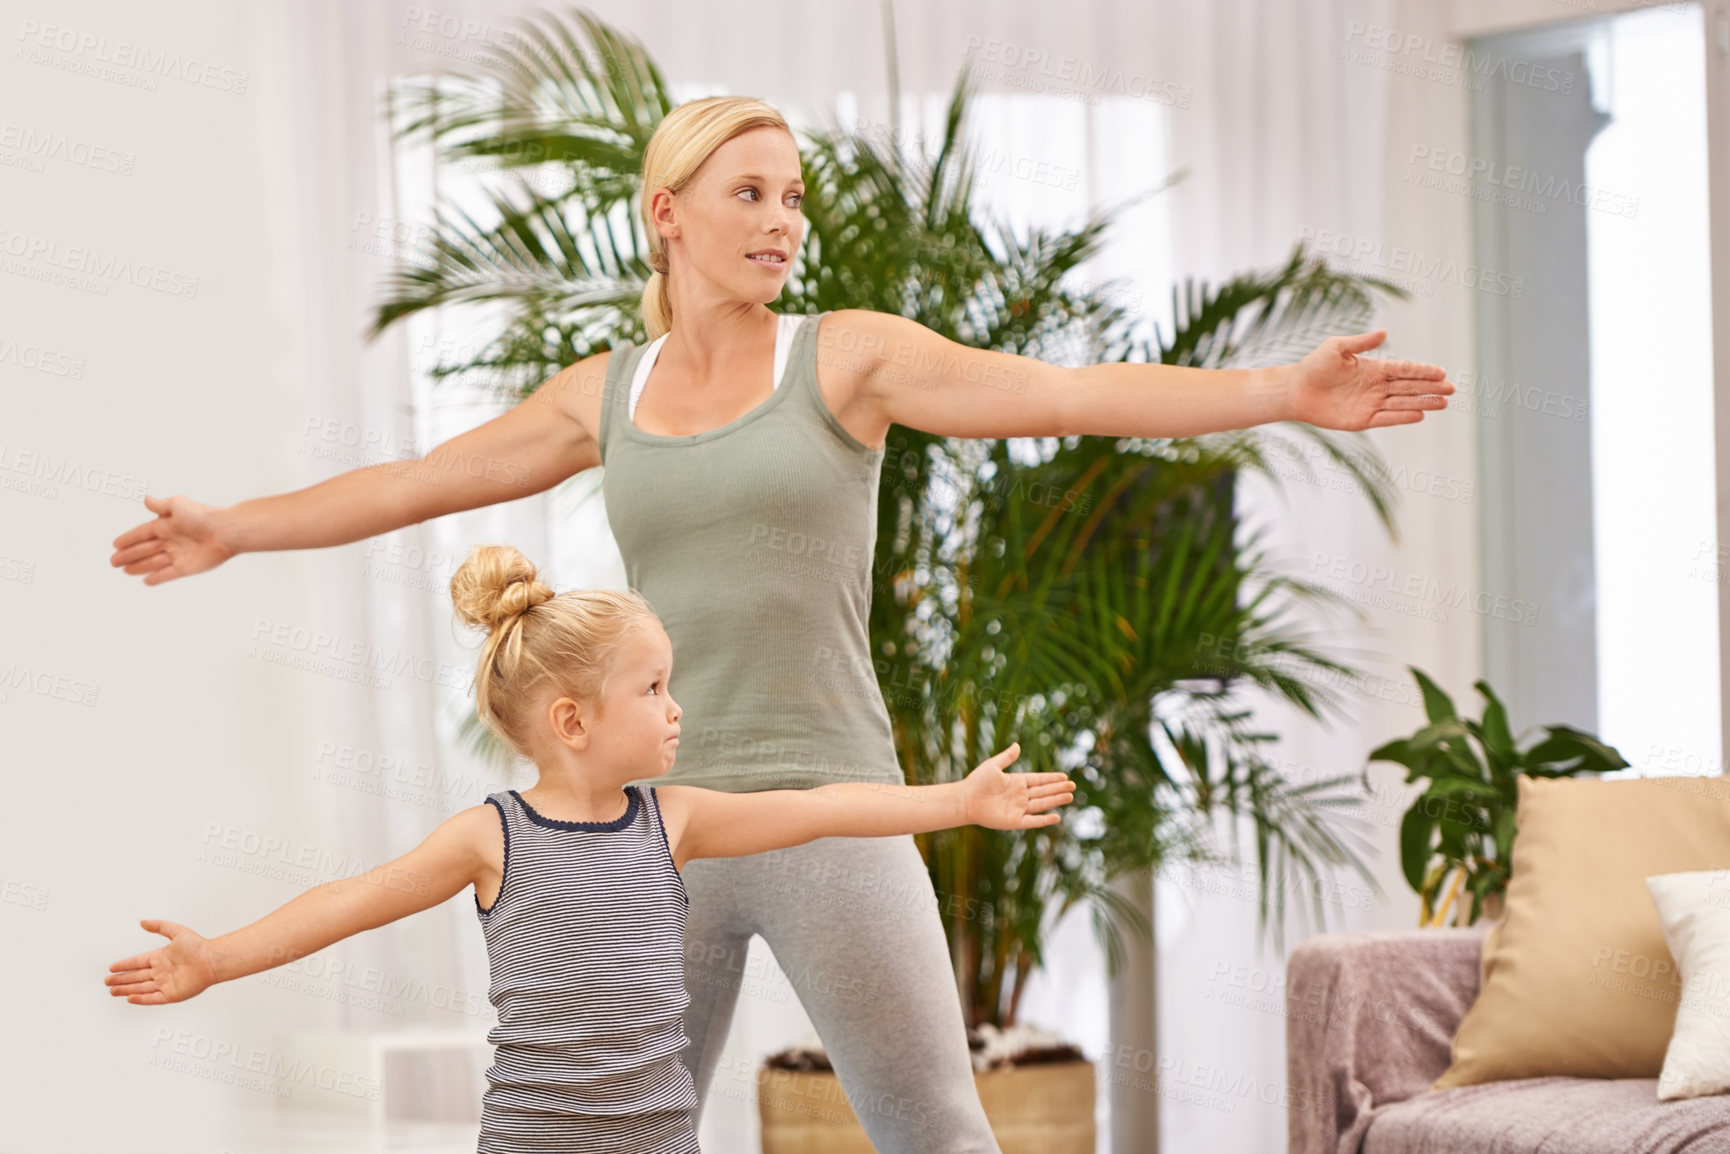 Buy stock photo Yoga, exercise with mom and daughter in living room, stretching out arms for balance and bonding. Woman, young girl and fitness together at family home, health and wellness with love and care